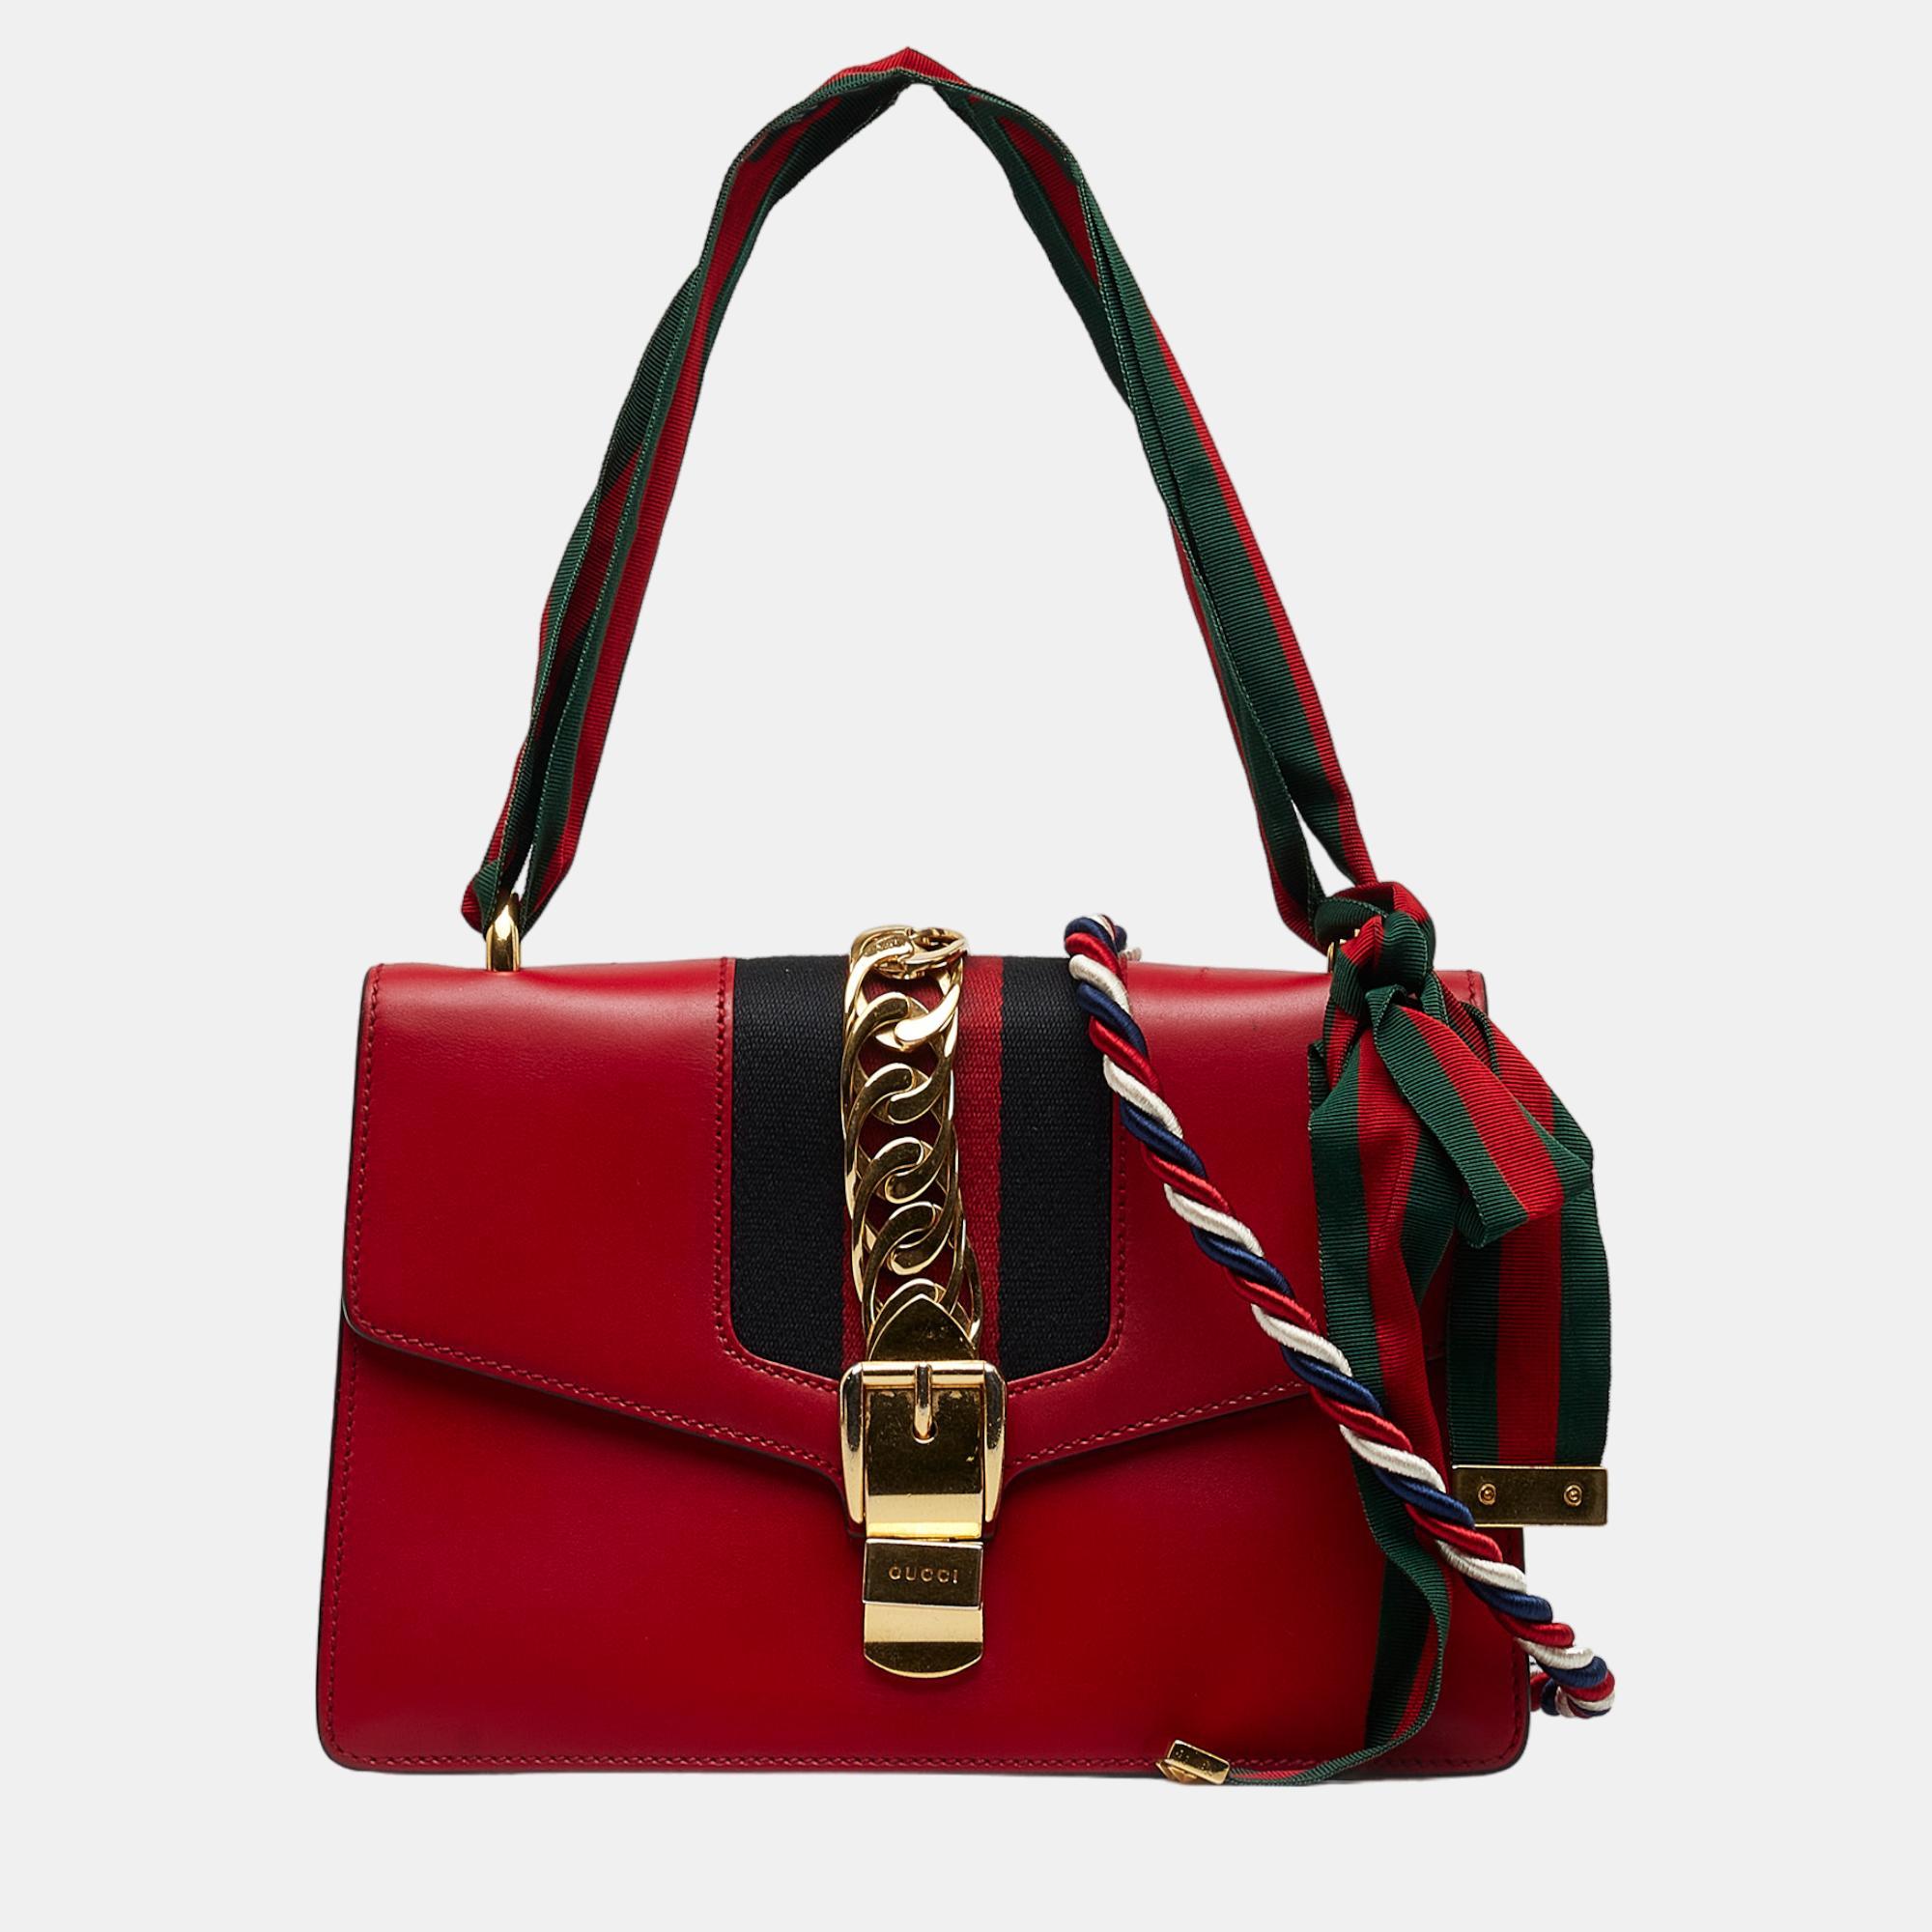 Gucci Red Small Sylvie Satchel